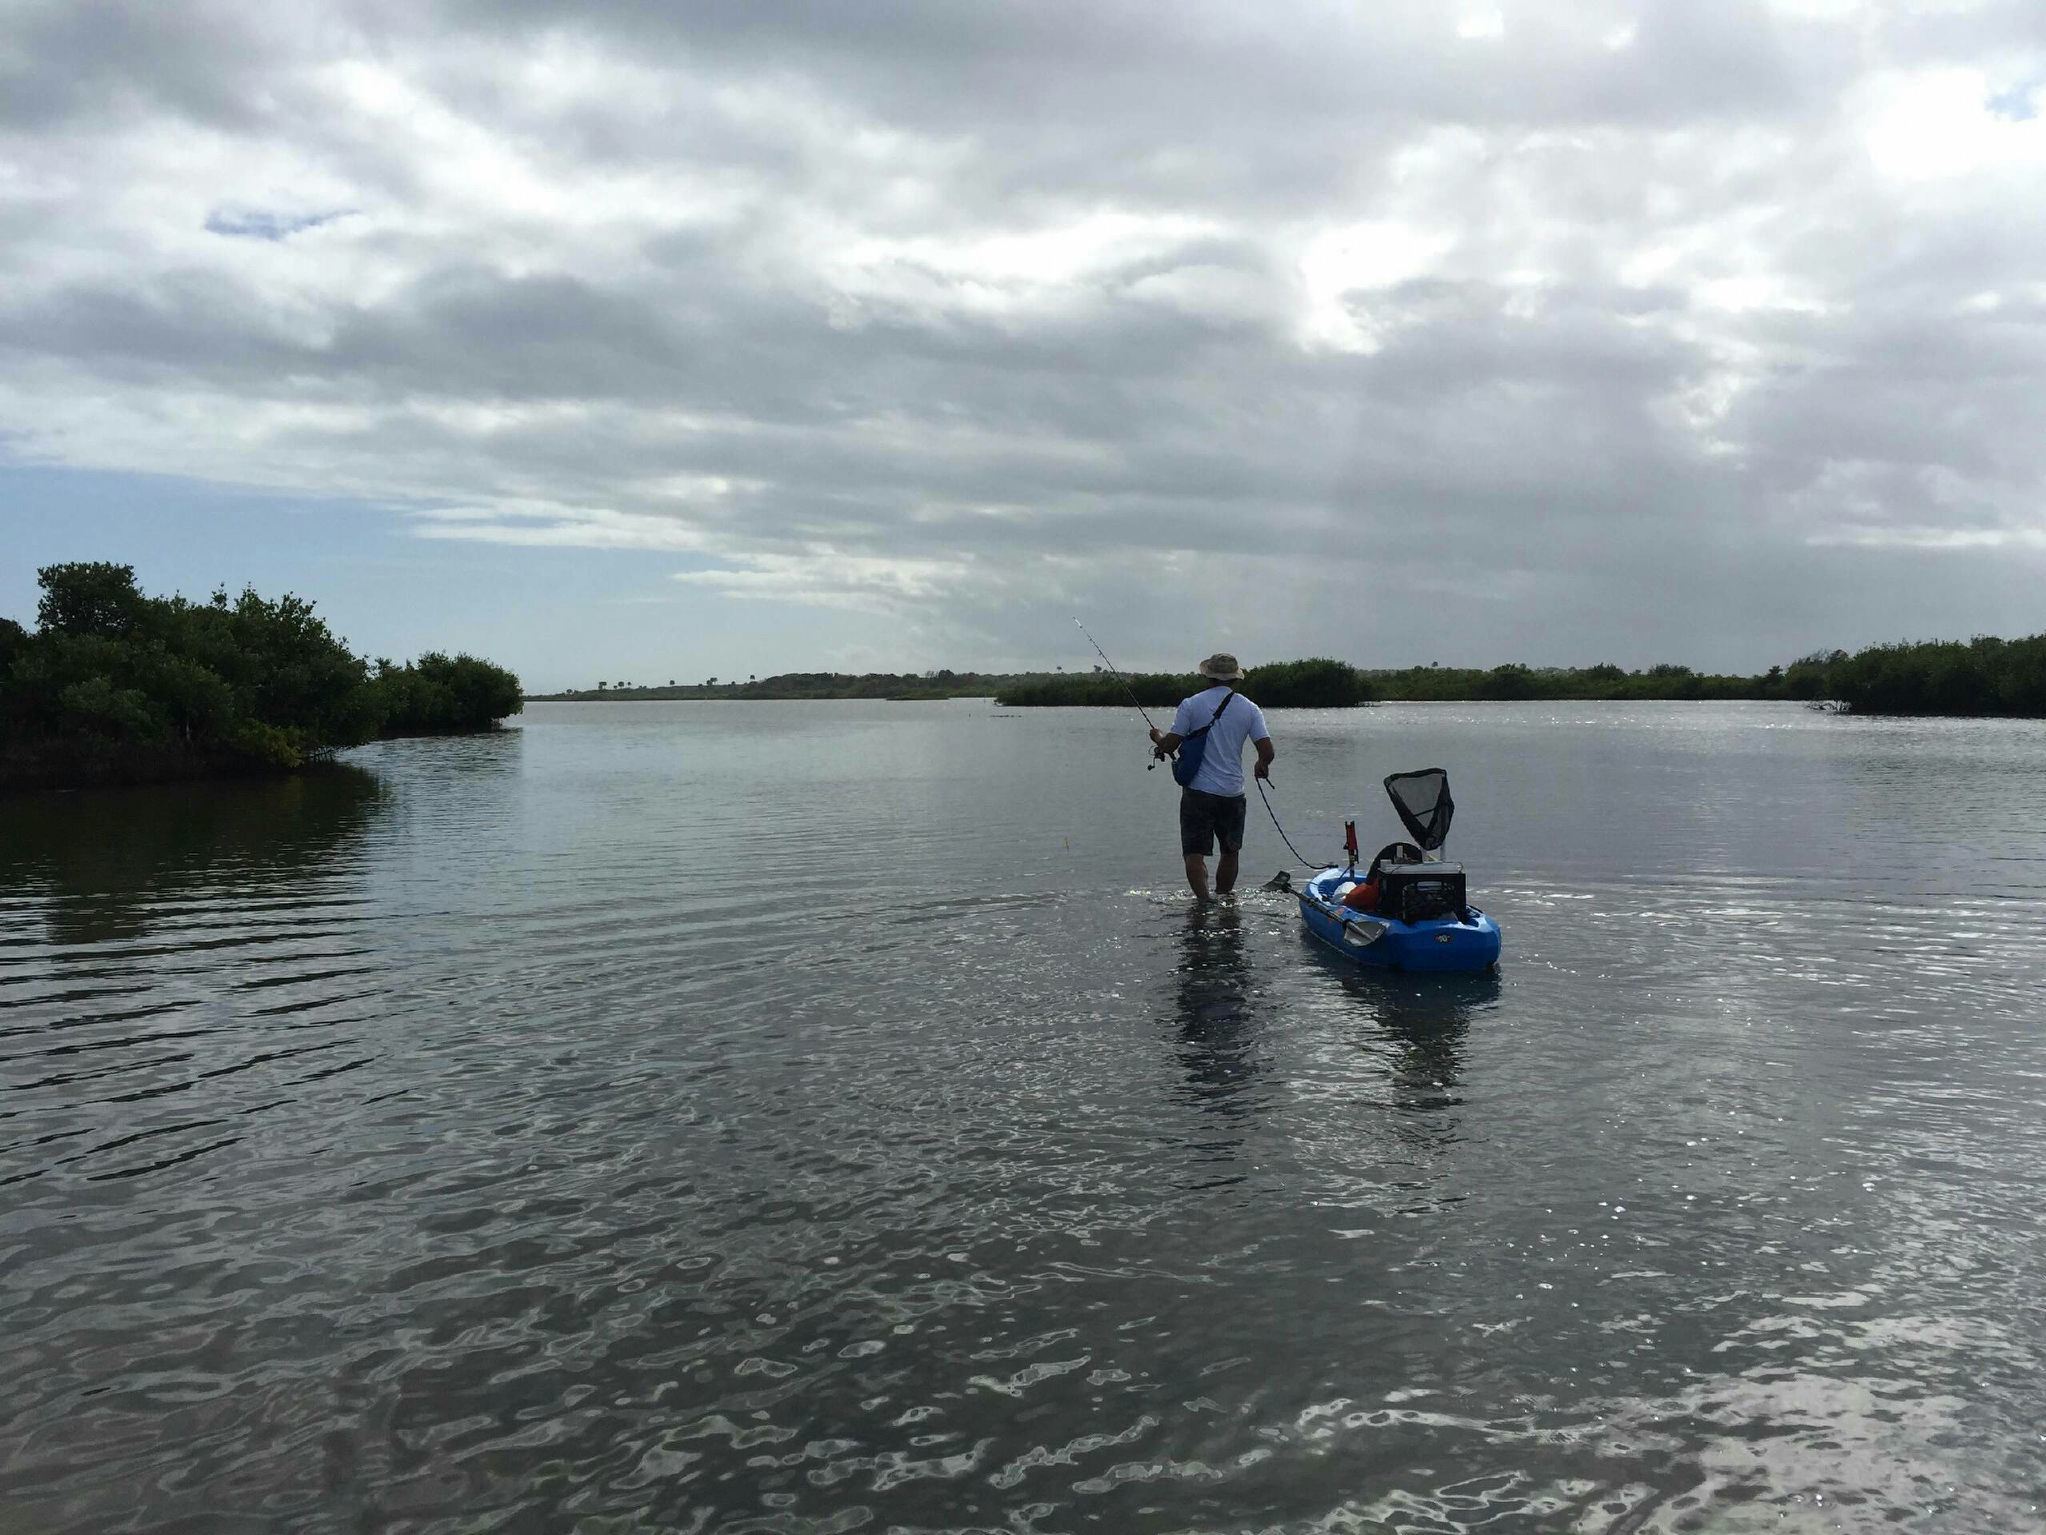 Gerry Realin copes with his PTSD by spending time on the Intercoastal Waterway near his home in Volusia County, Fla. (Photo by Abe Aboraya/WMFE)